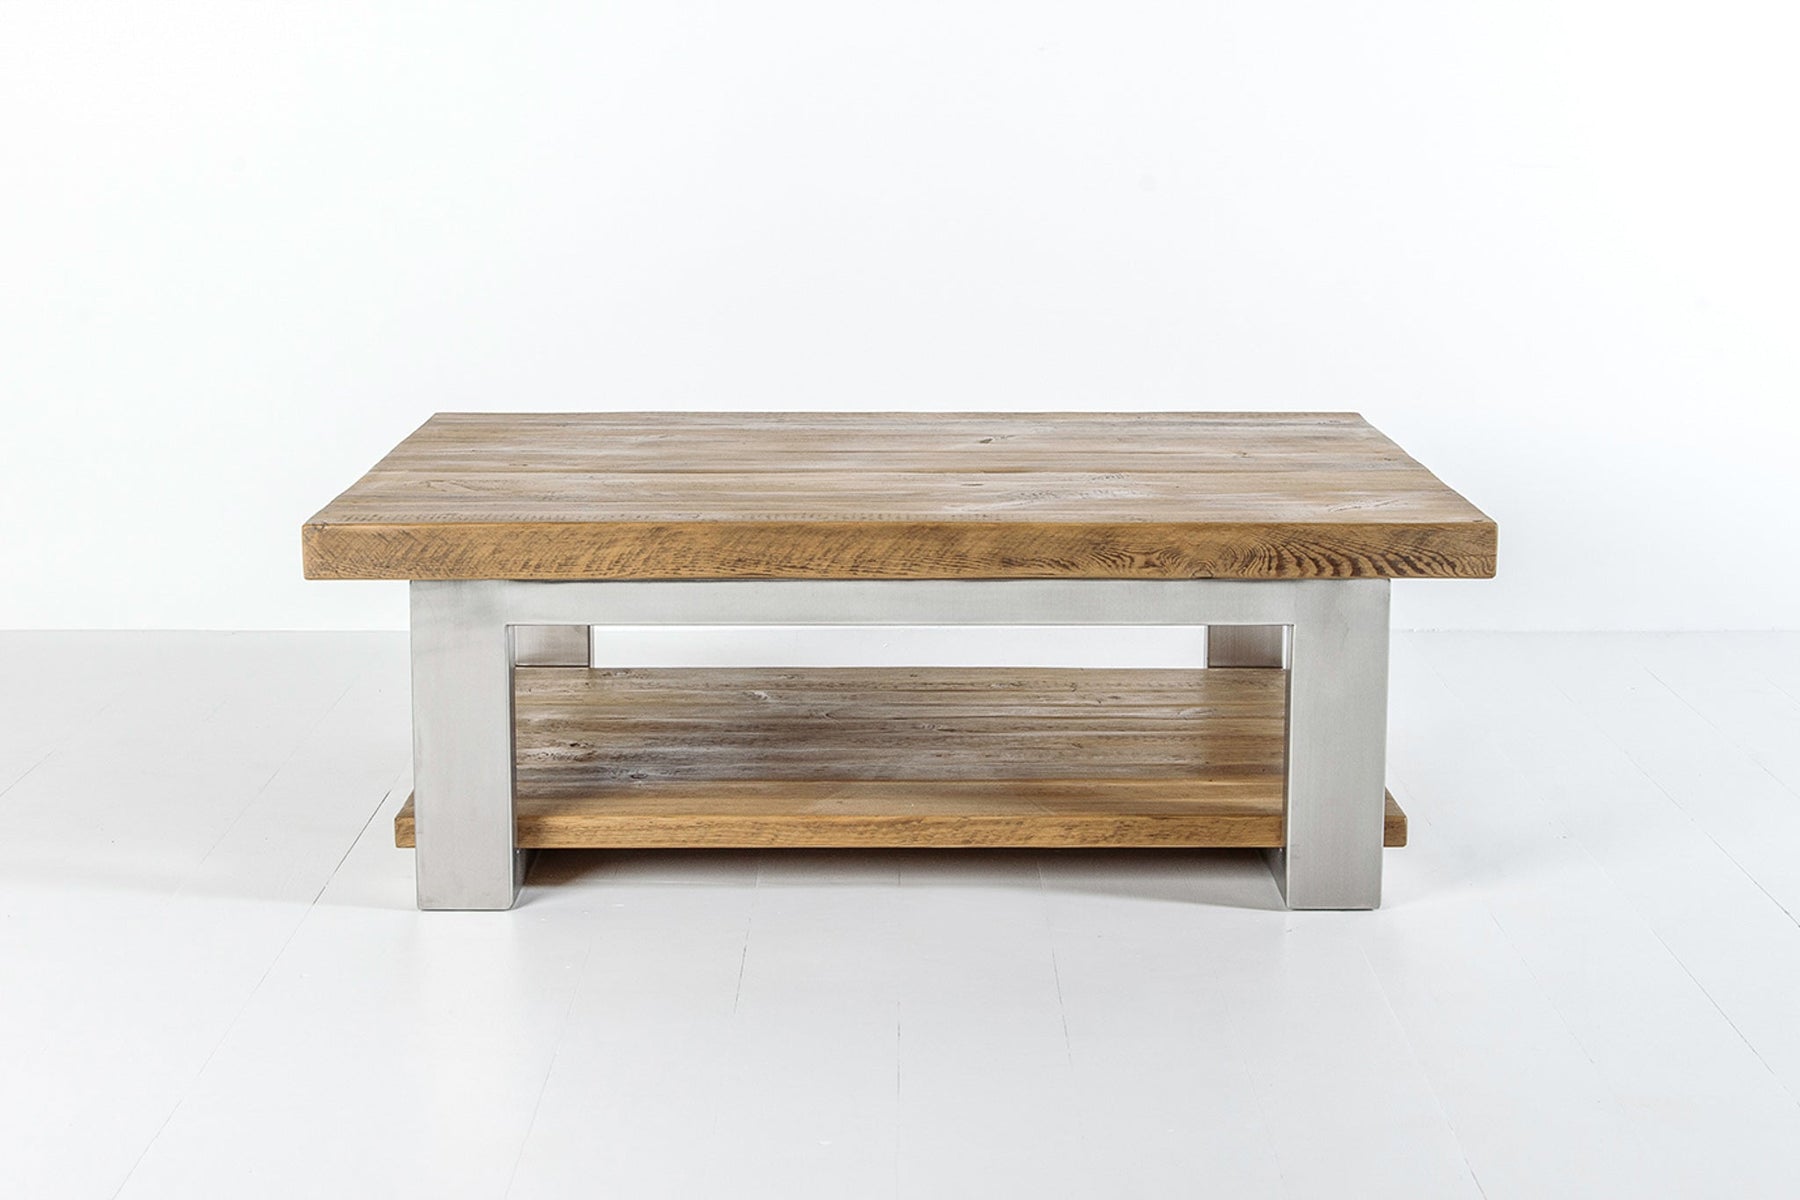 Cavendish Coffee Table With Shelf